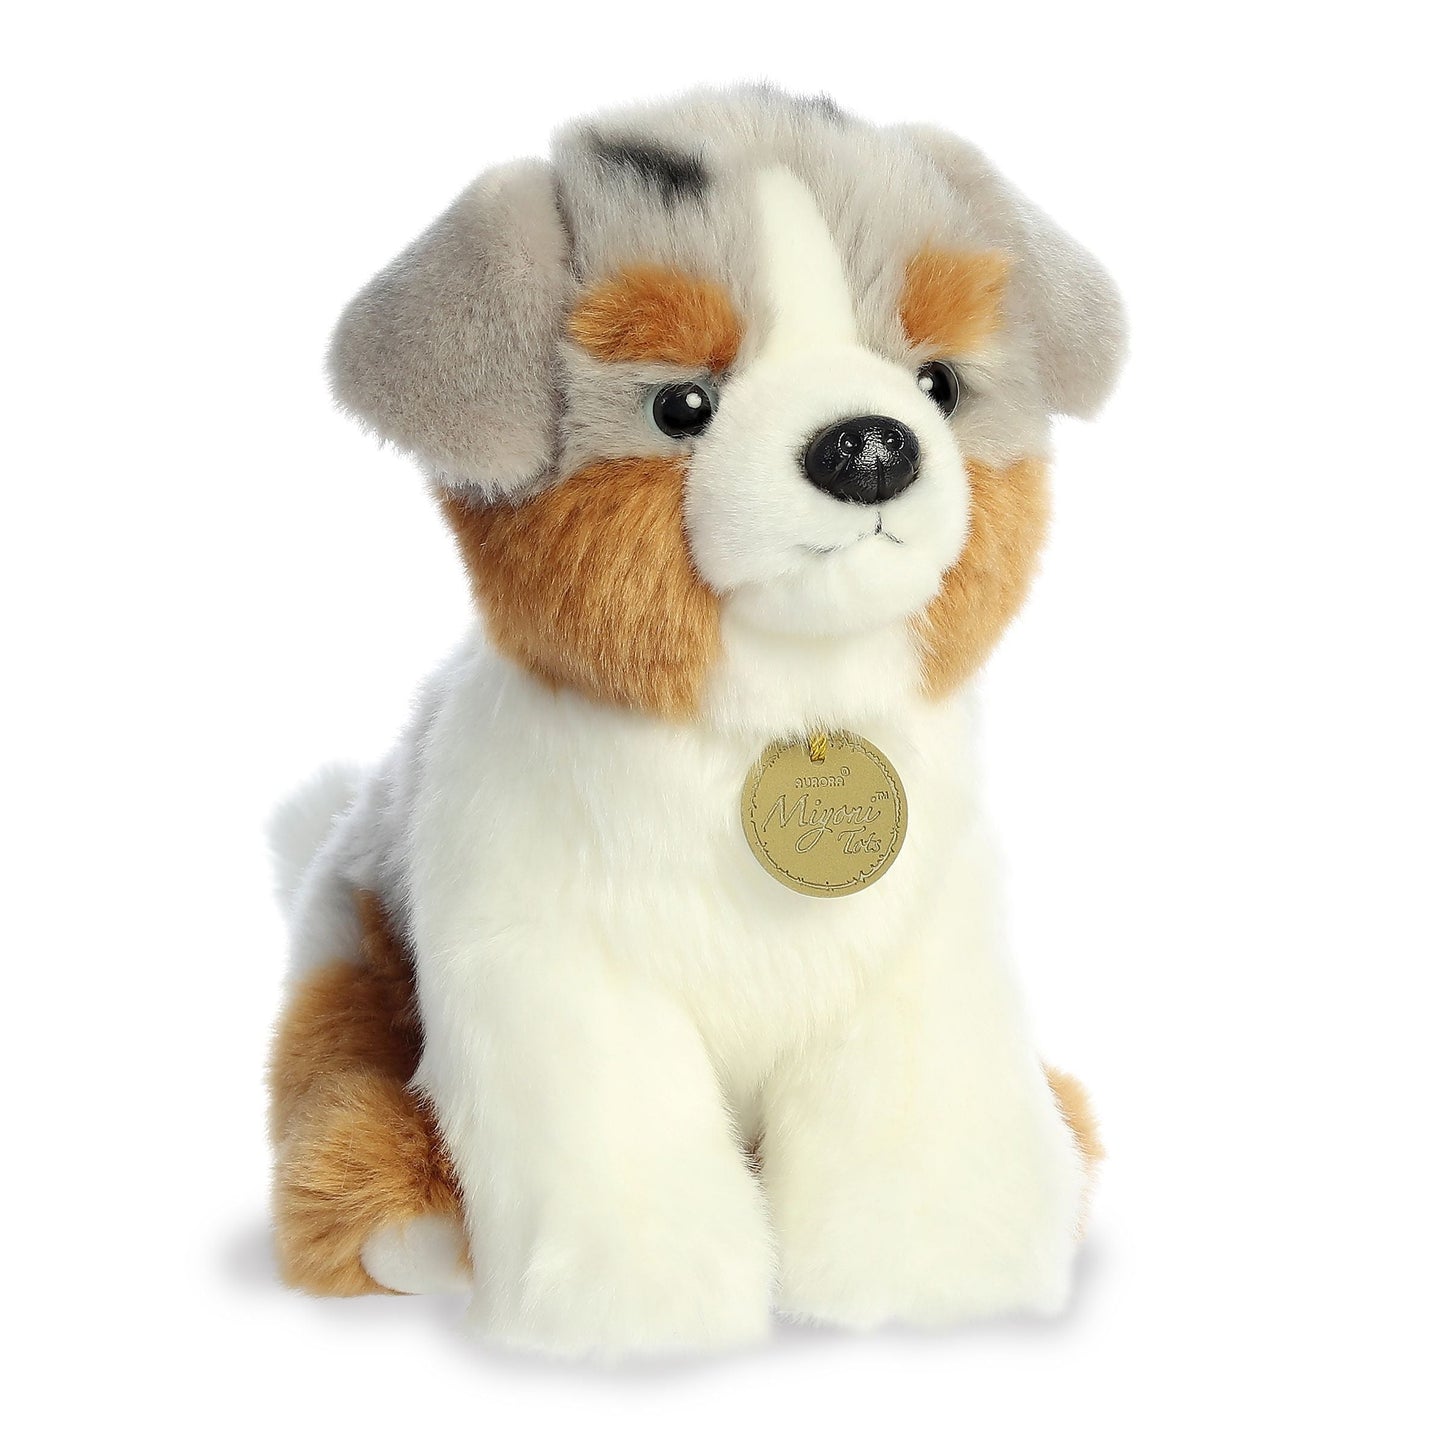 Miyoni features your favorite animals in plush form with a simultaneously realistic and adorable design! This Aussie pup is an Australian Shepherd breed with a mixed color coat and adorable puppy face.